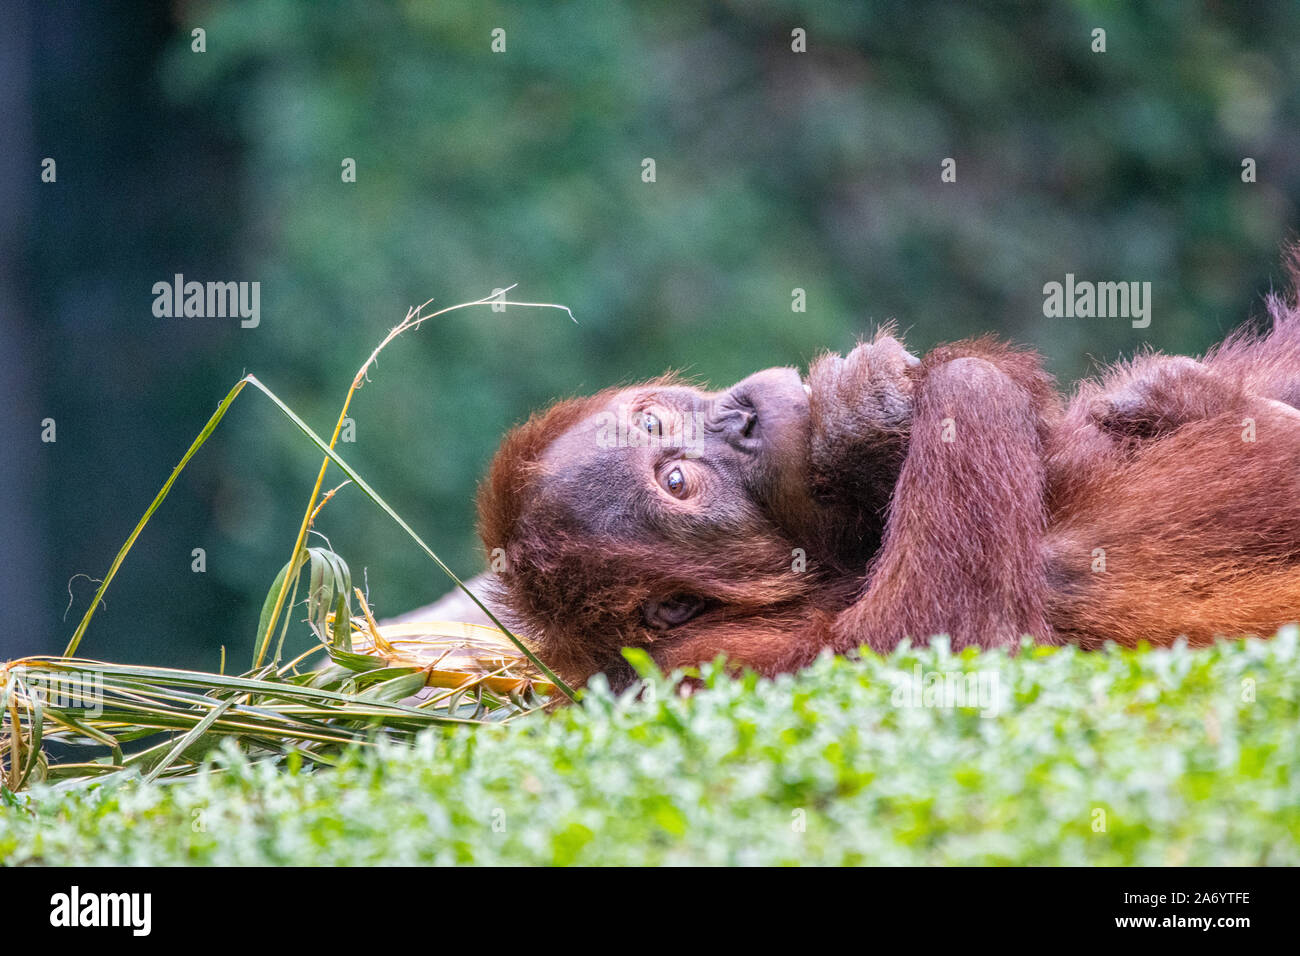 Orangutan lying on grass patch with a lazy expression at the Singapore Zoo Stock Photo